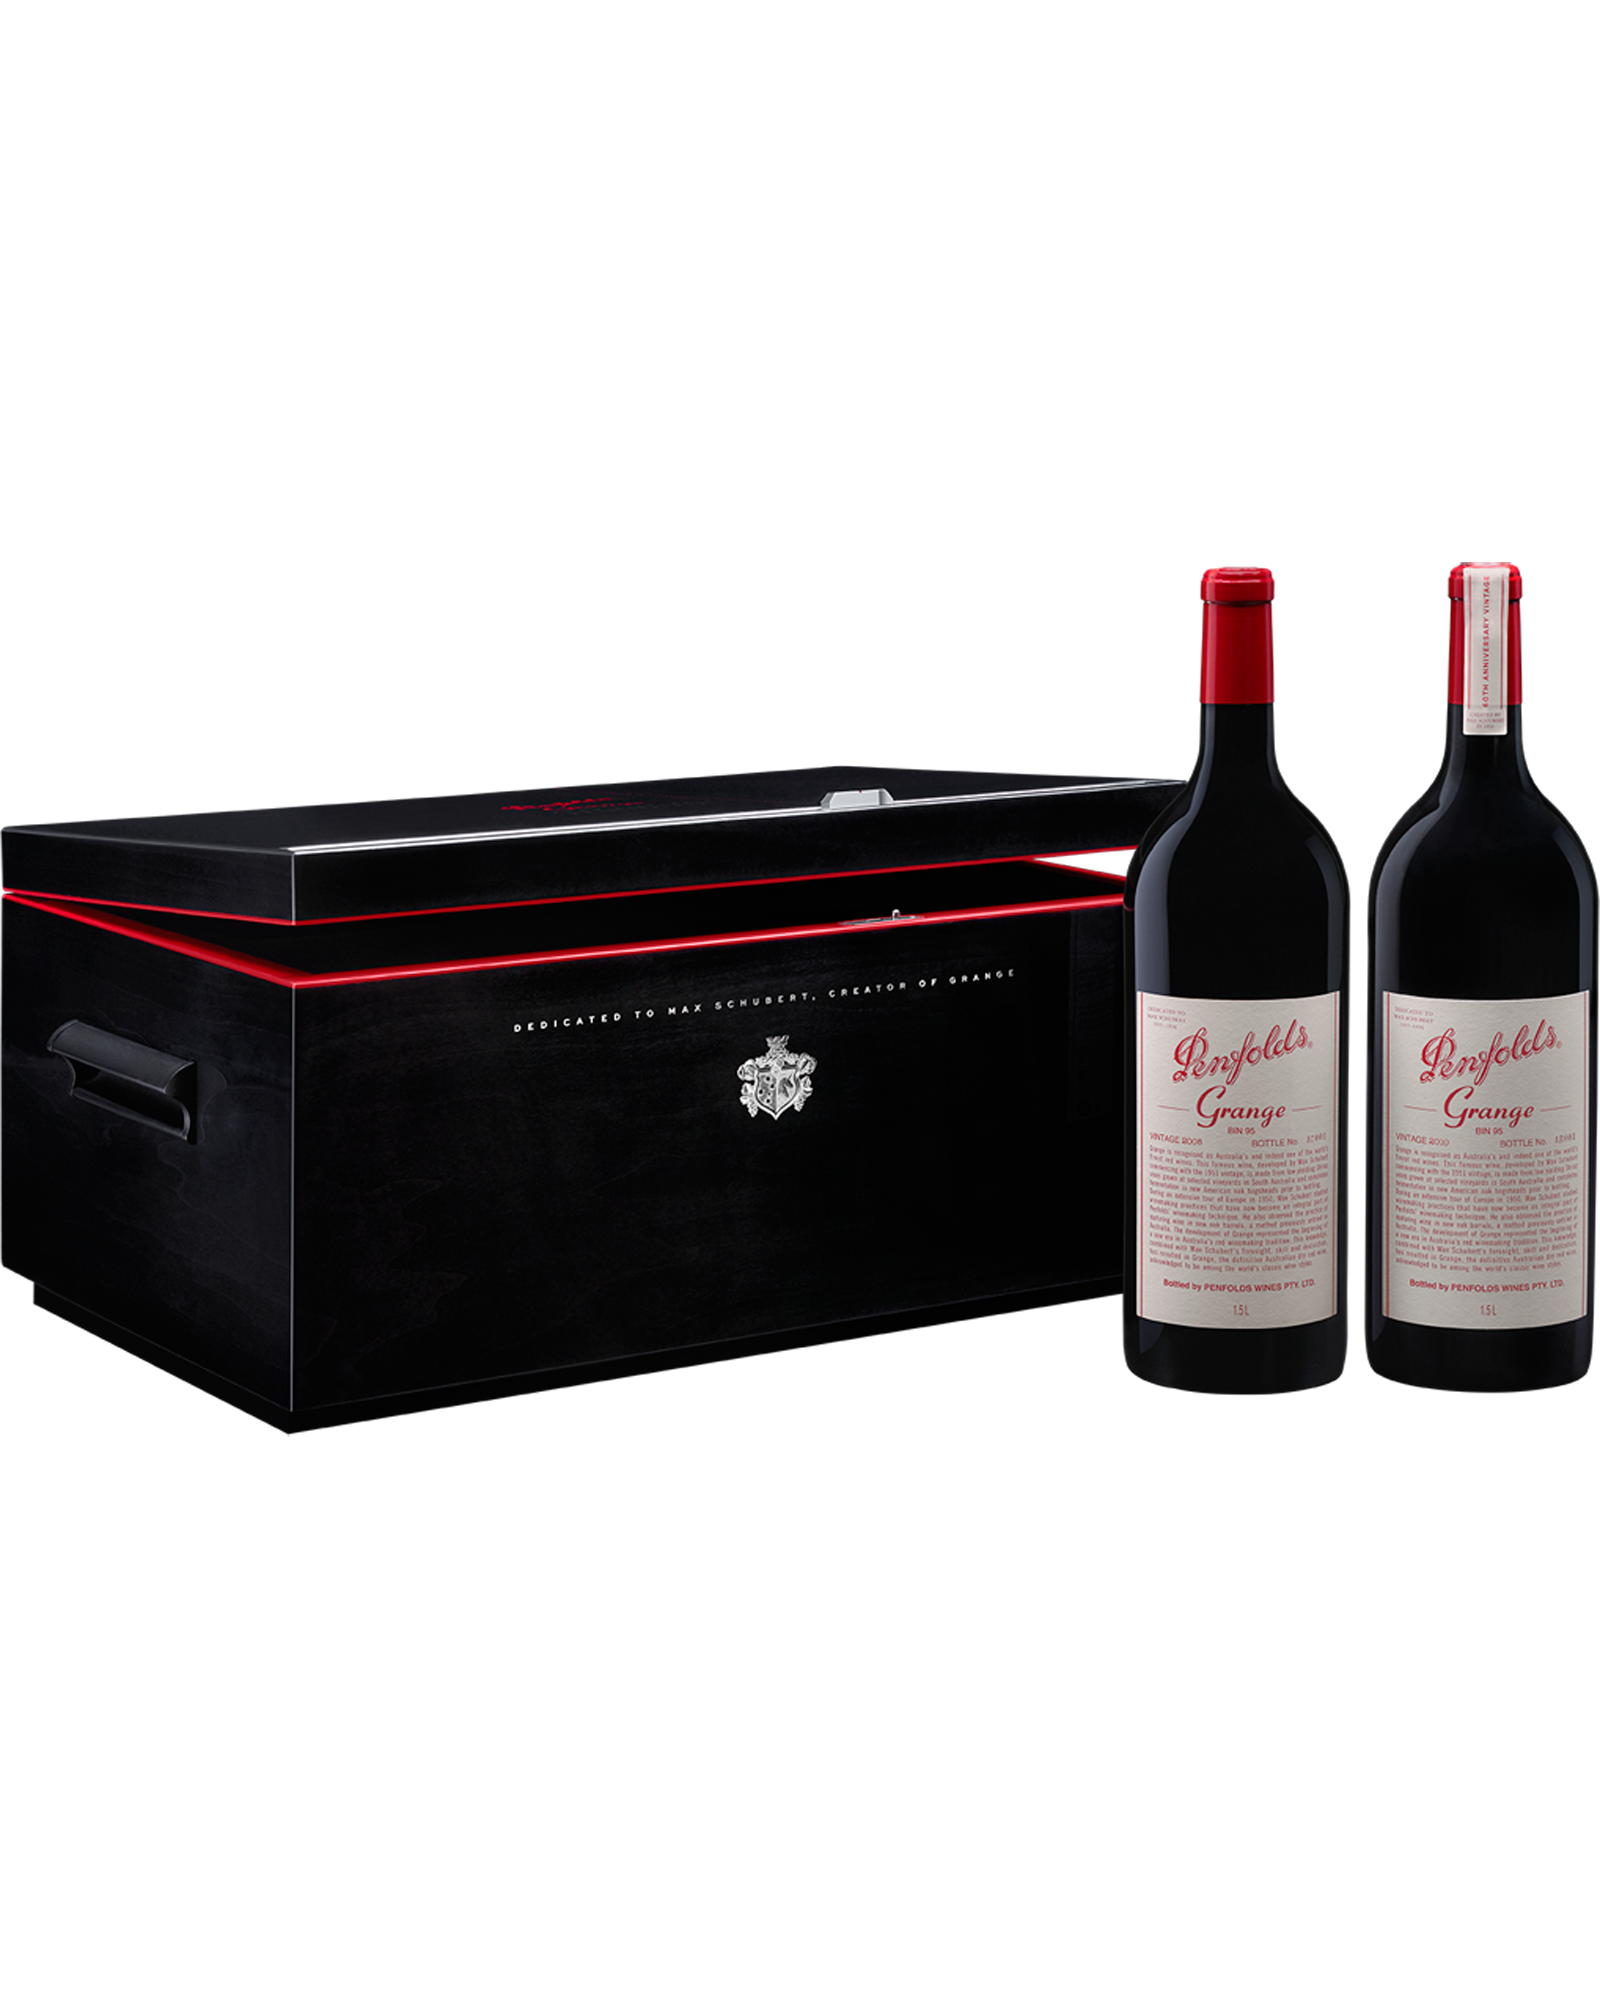 Penfolds Grange Magnum Twin Pack 2008 and 2010